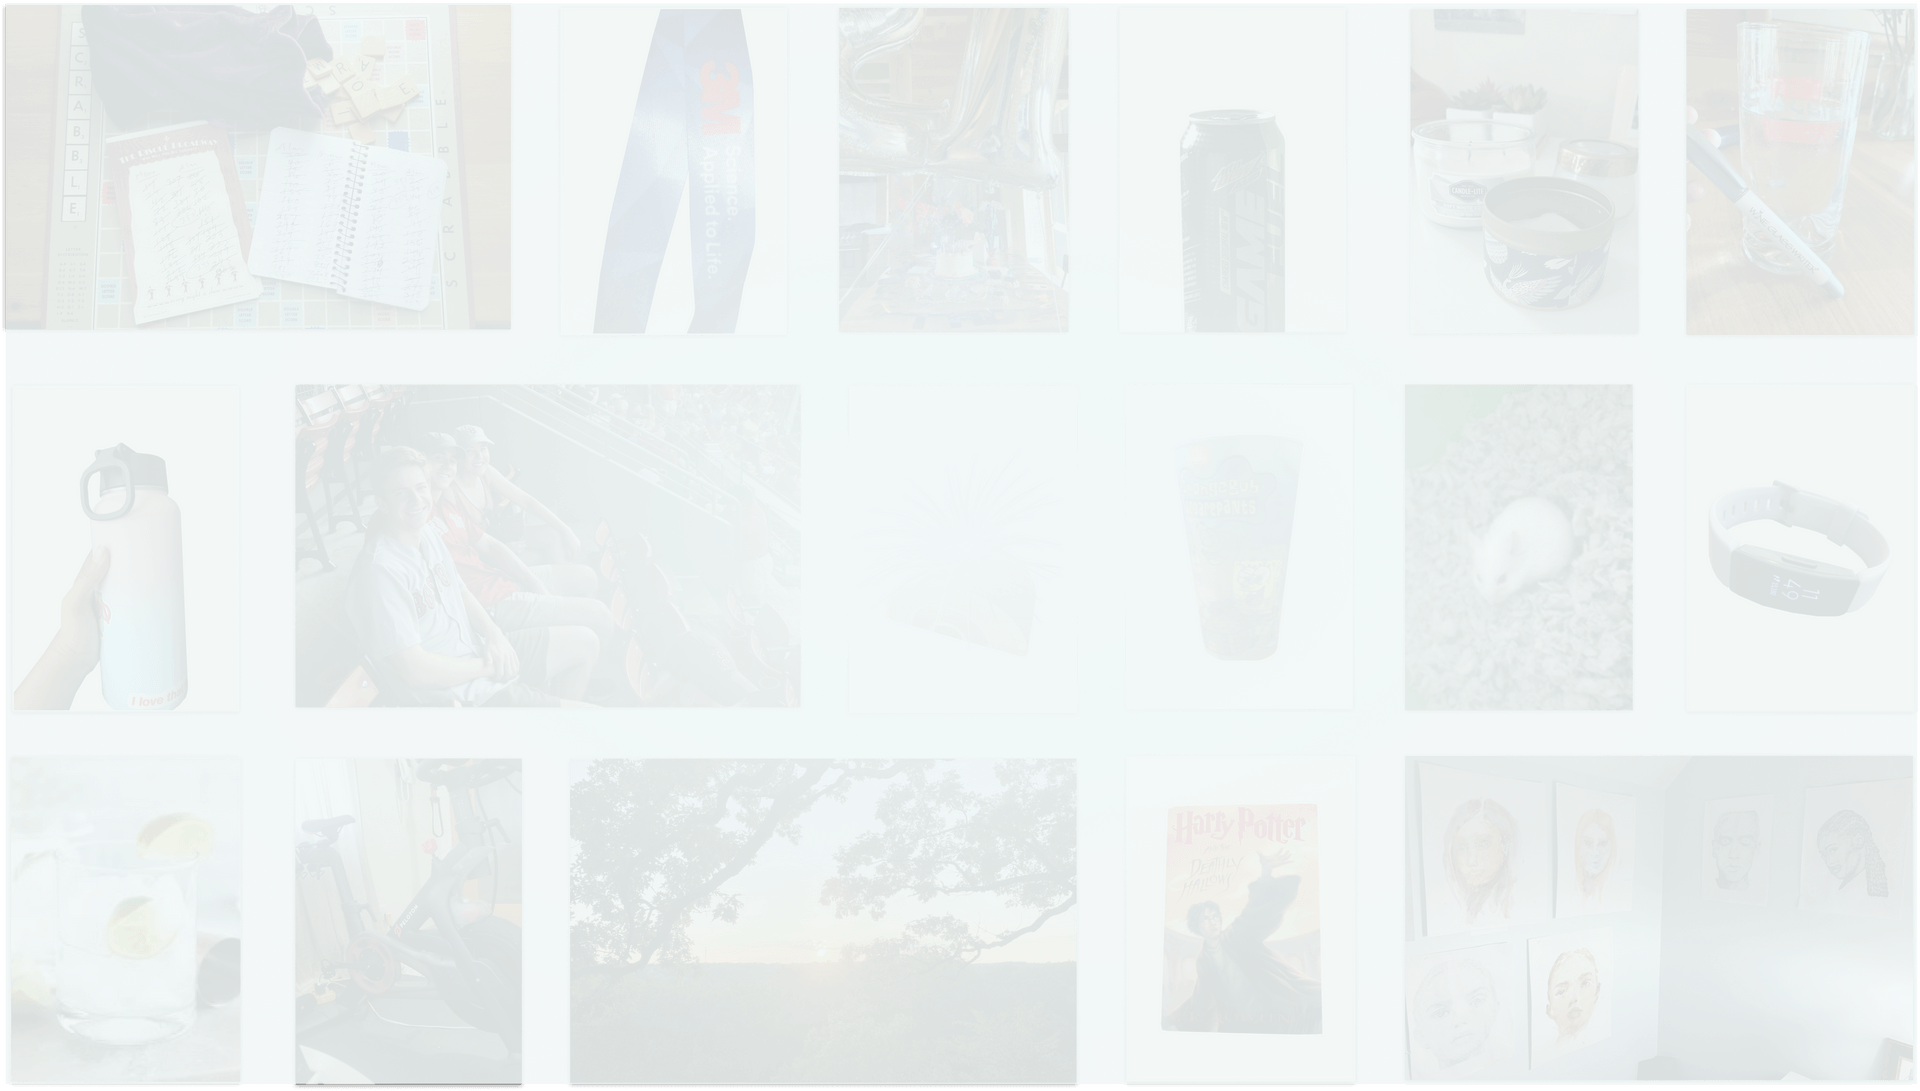 background image with many photographs of submitted items in a grid